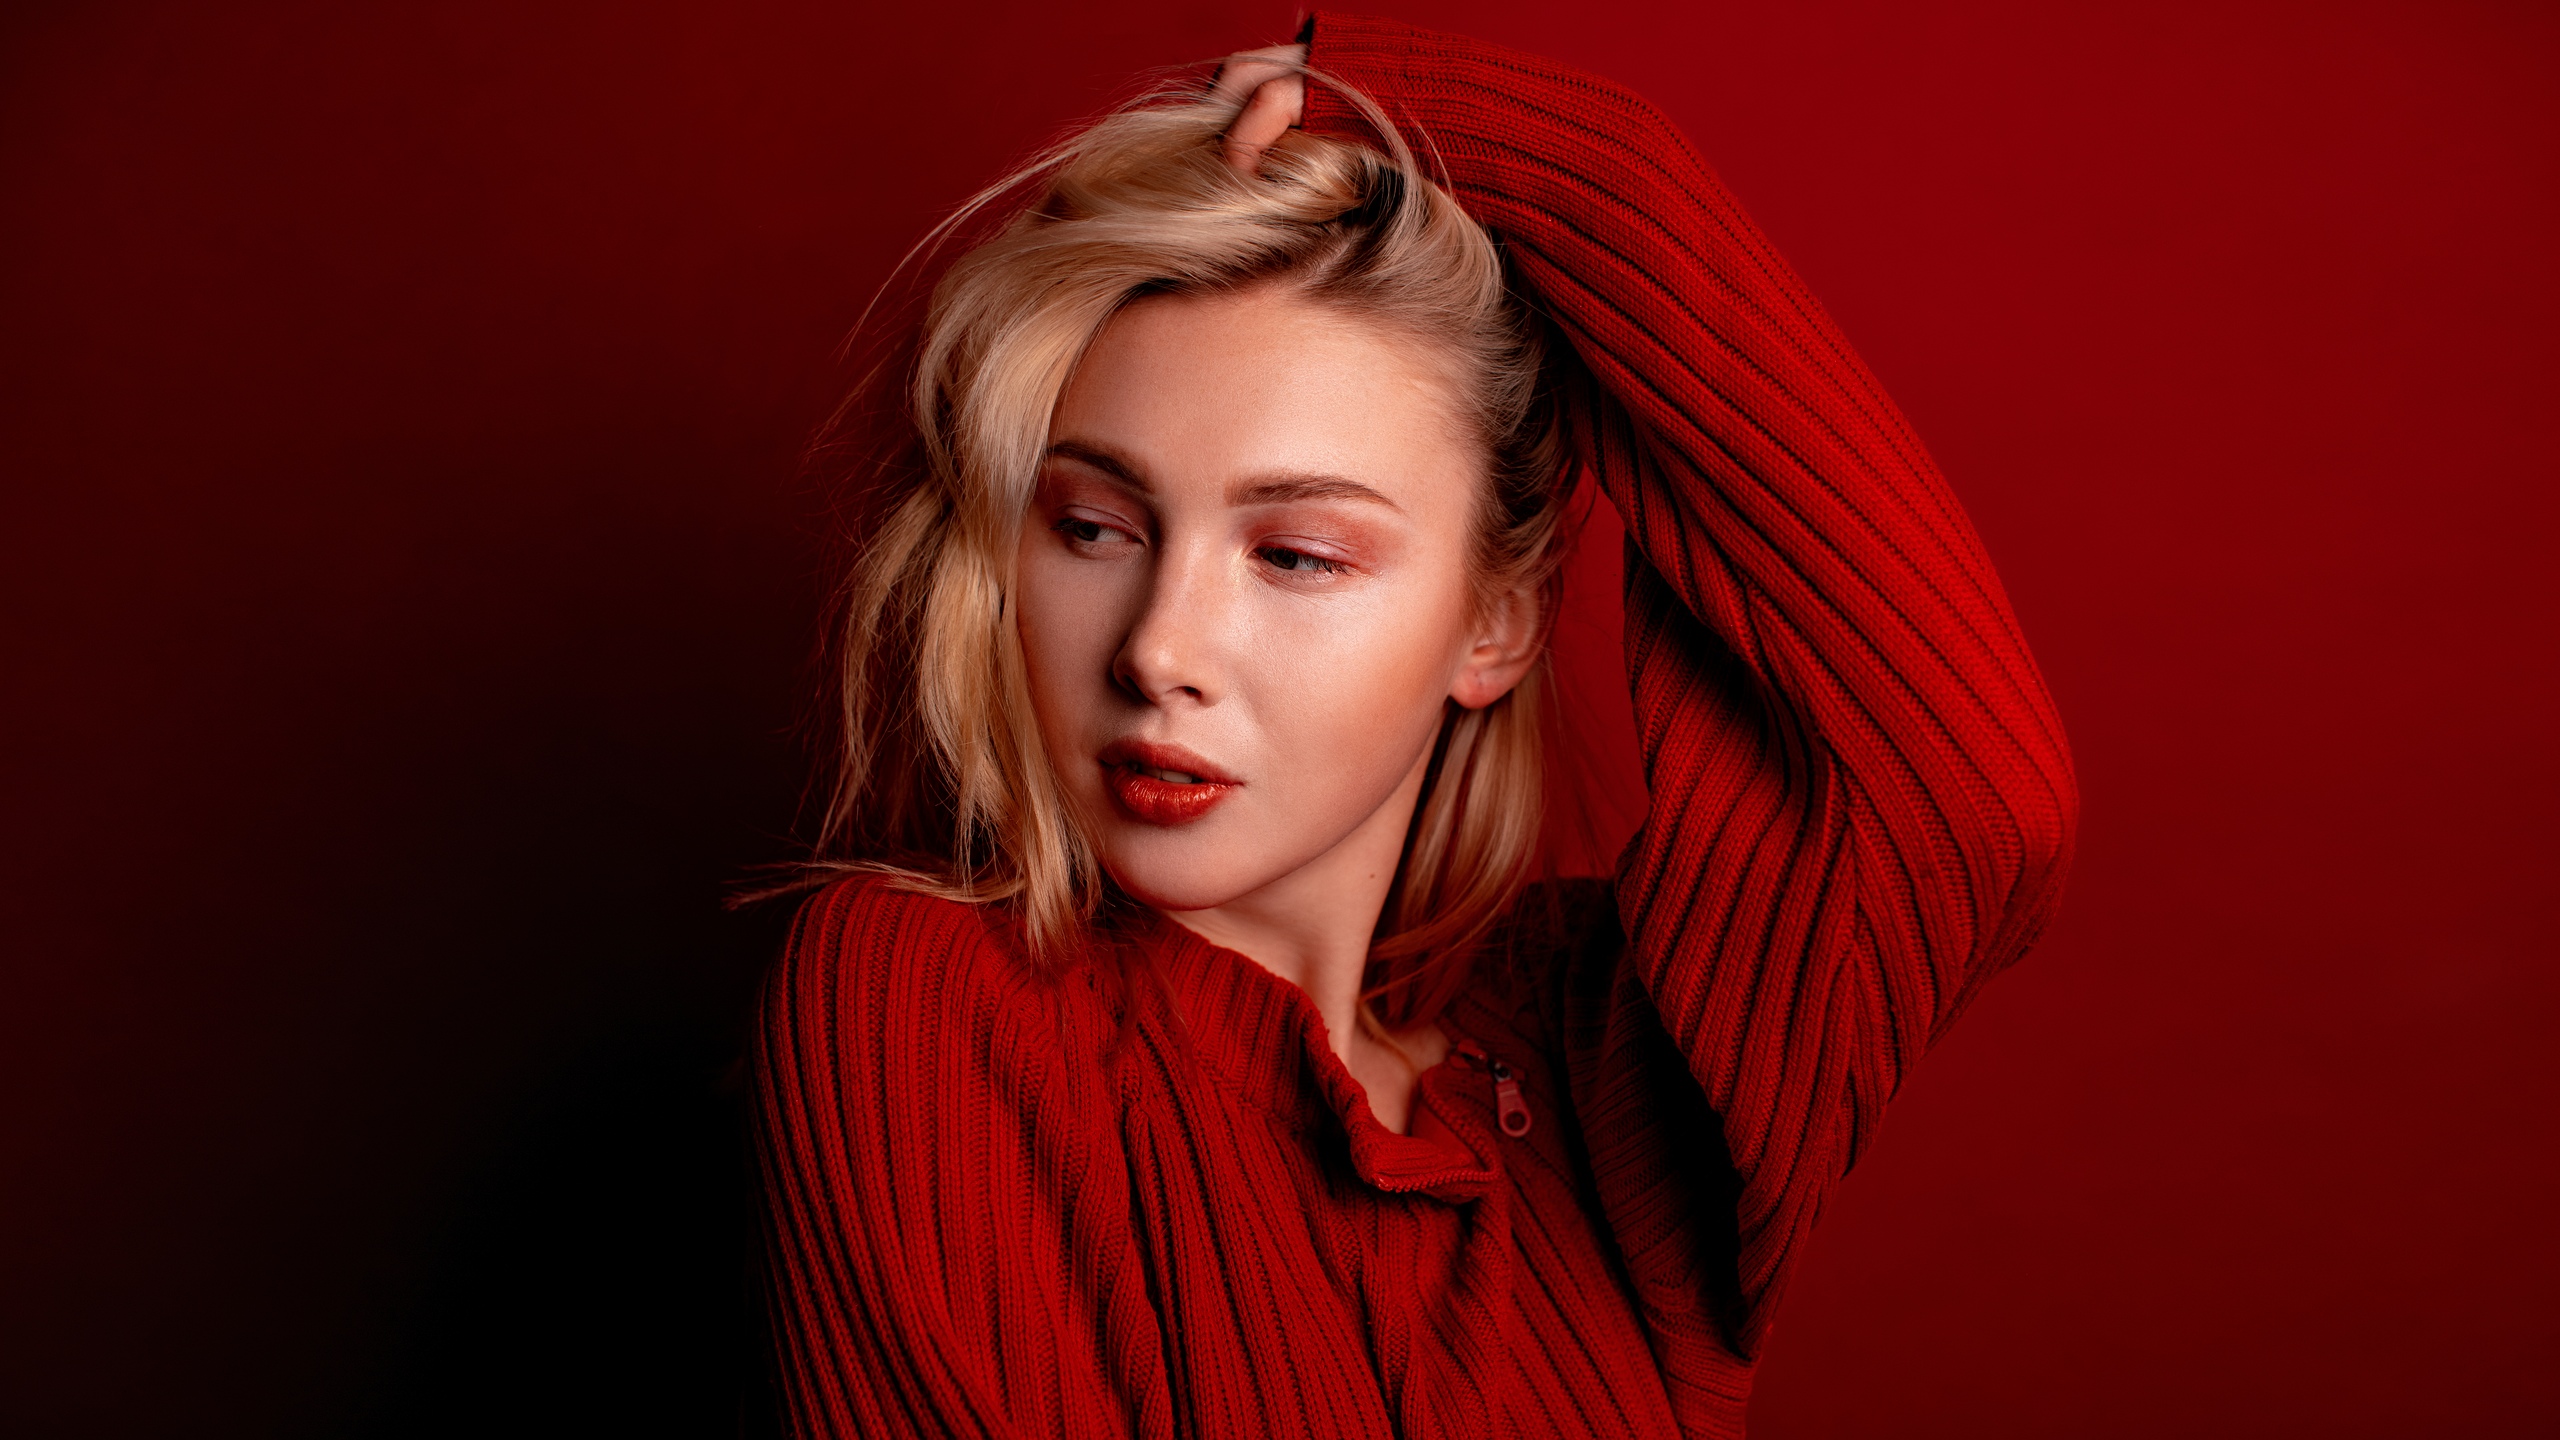 Women Model Blonde Touching Hair Looking Away Red Lipstick Red Sweater Sweater Red Background Simple 2560x1440